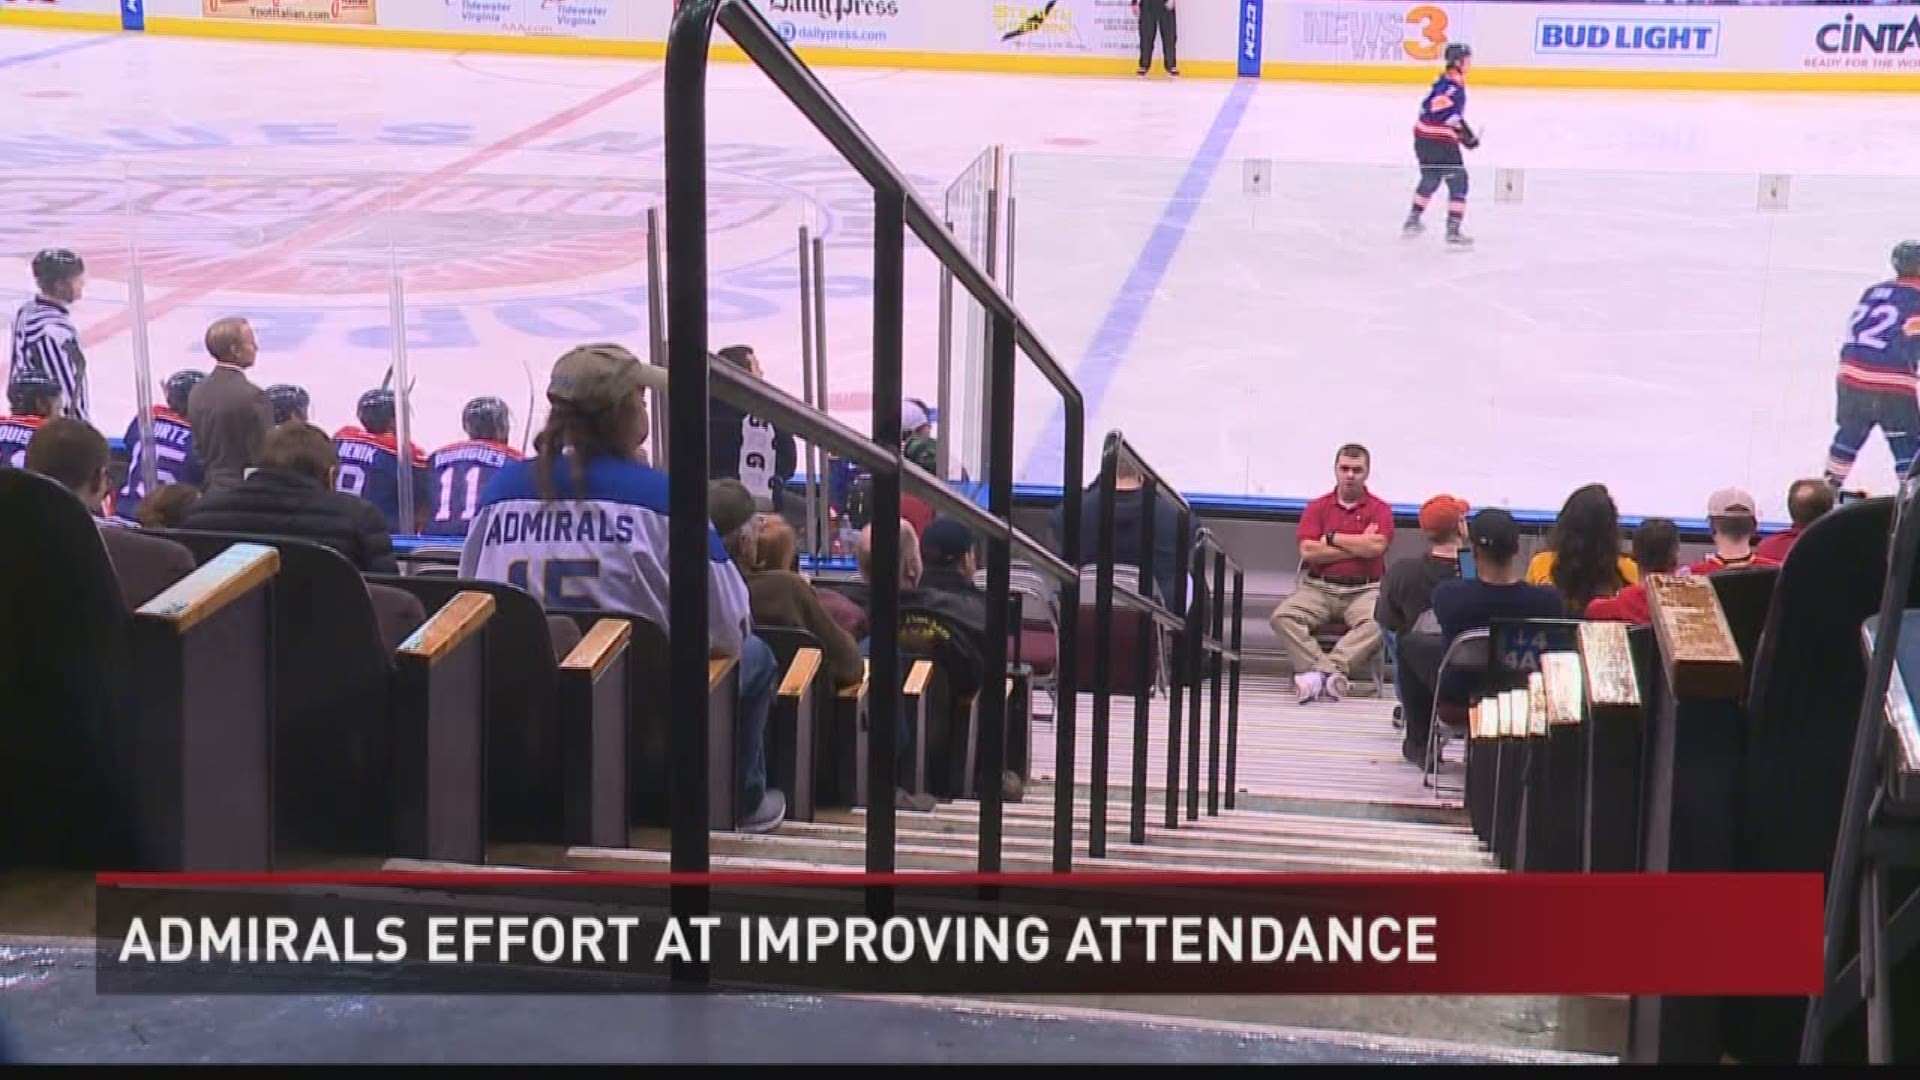 Besides putting a winning team on the ice, the Norfolk Admirals are taking other steps to increase the number of fans in the stands.